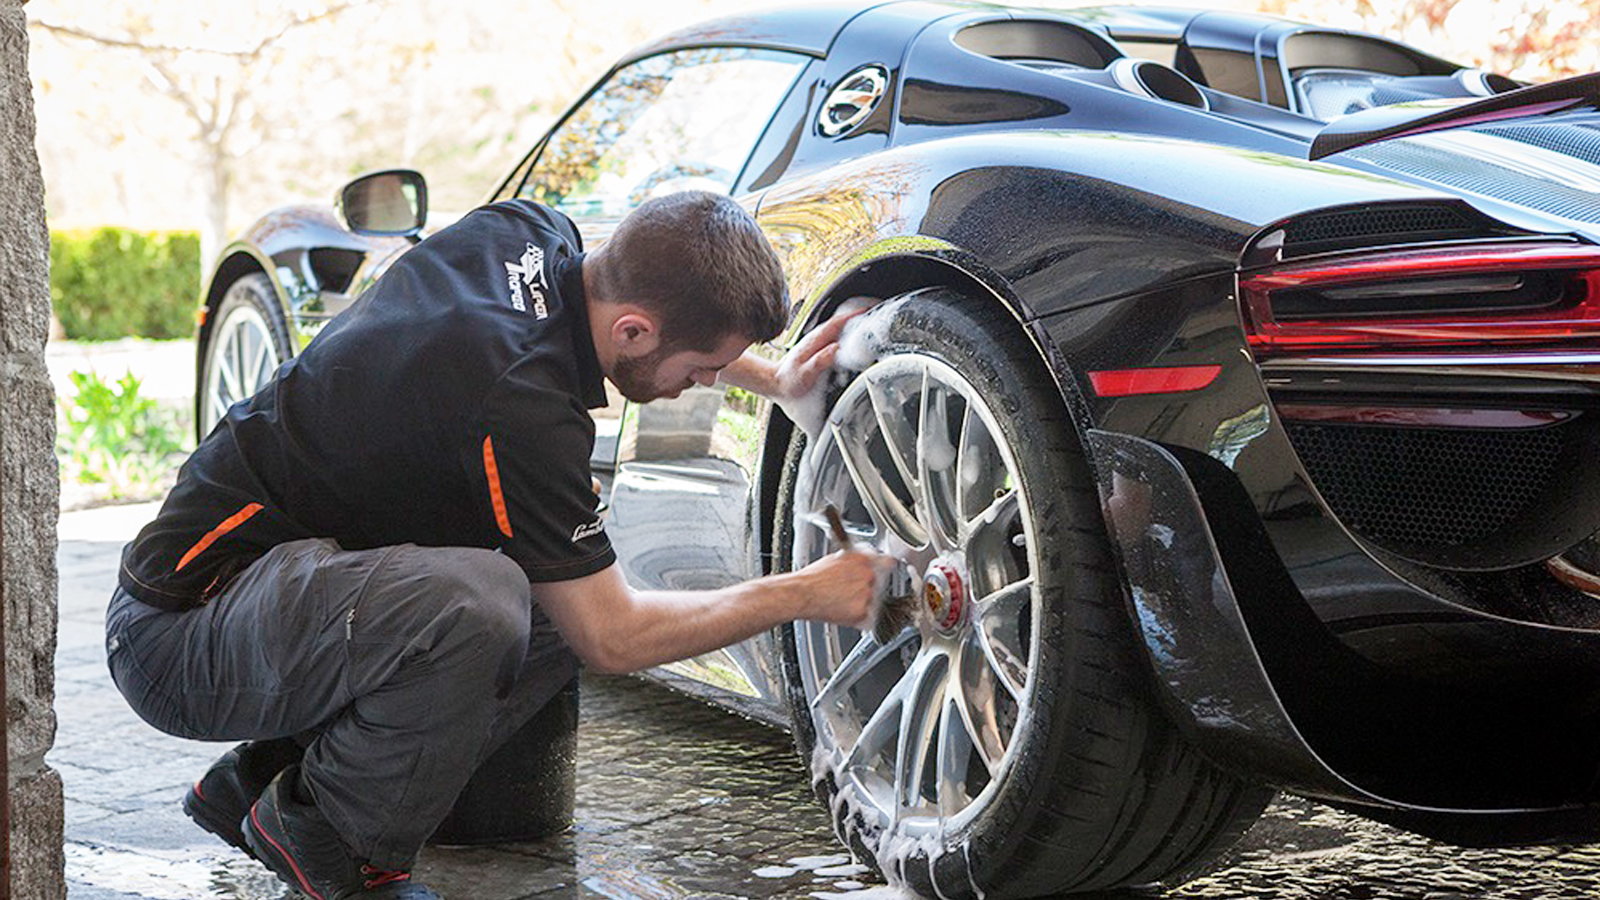 The beginner's guide to buffing a car - Professional Carwashing & Detailing